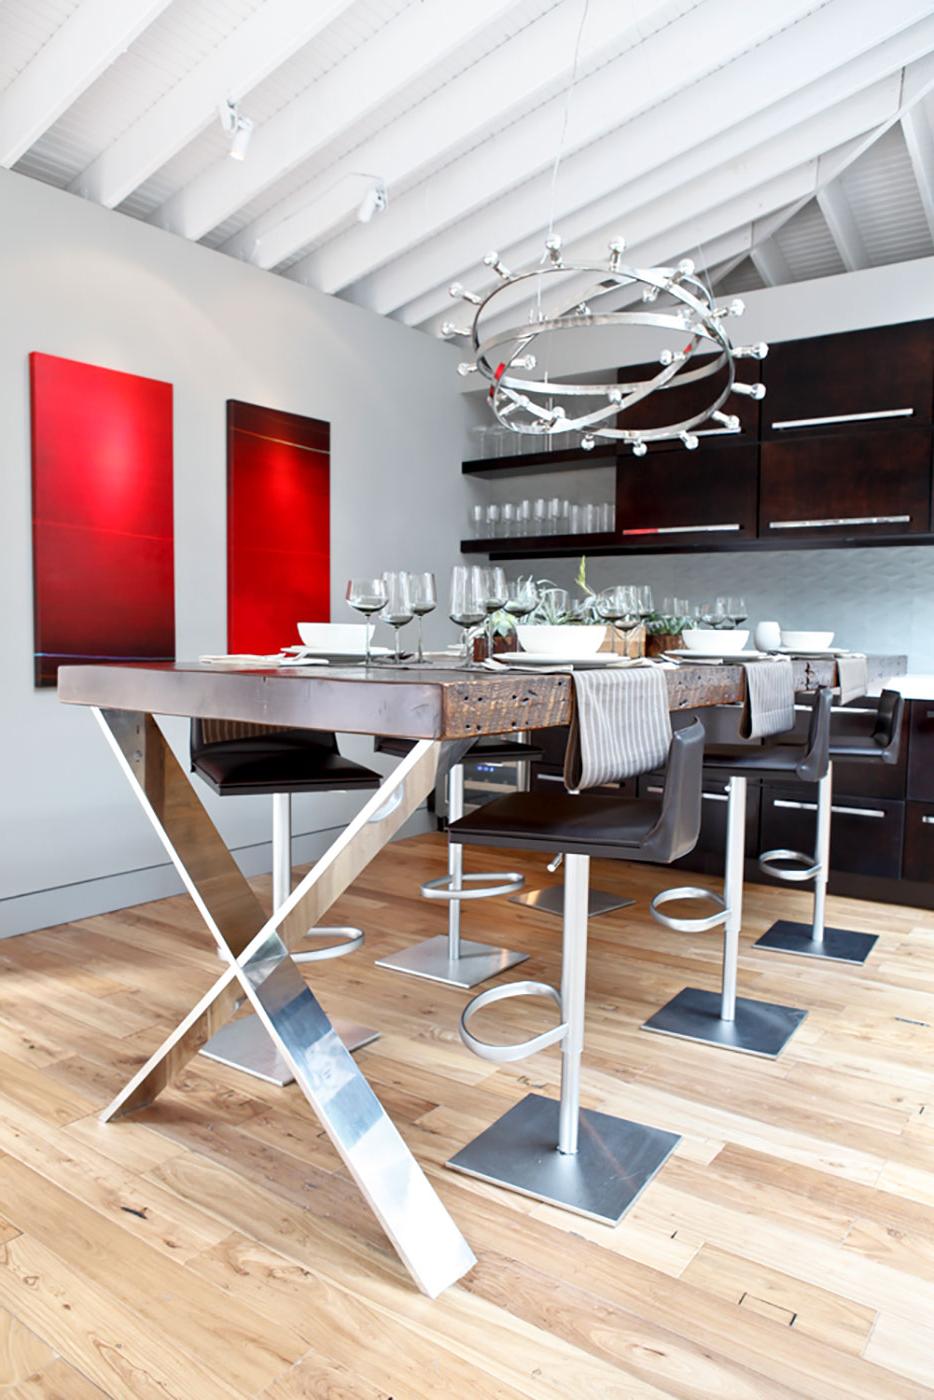 Sustainable Custom Table by Jeff Soderbergh